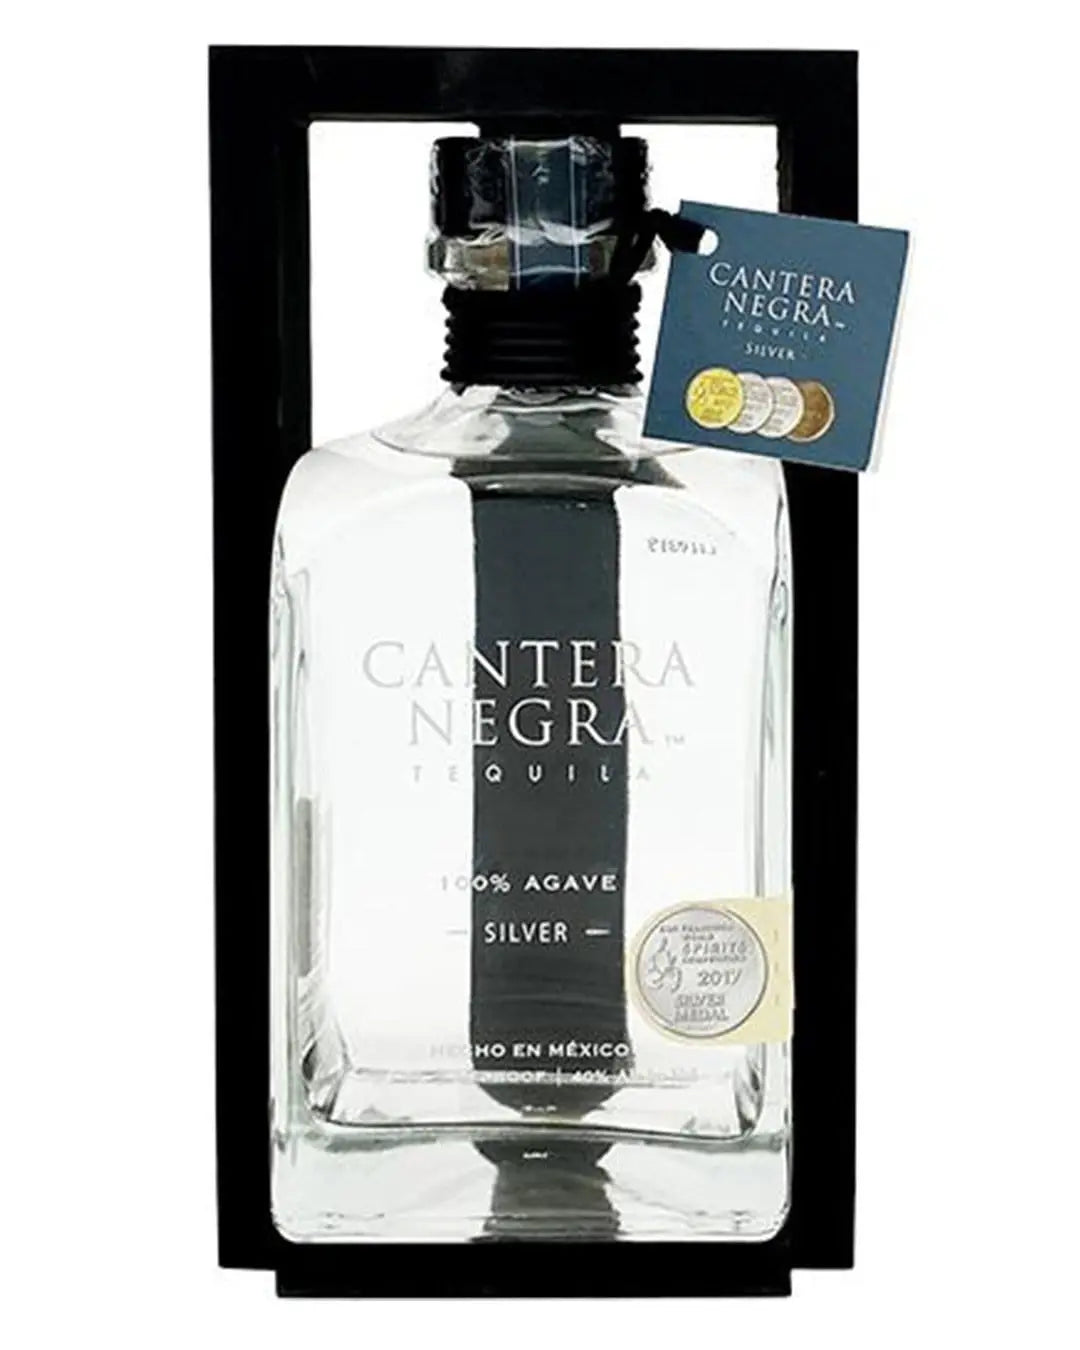 Cantera Negra Silver Tequila, 75 cl Tequila & Mezcal